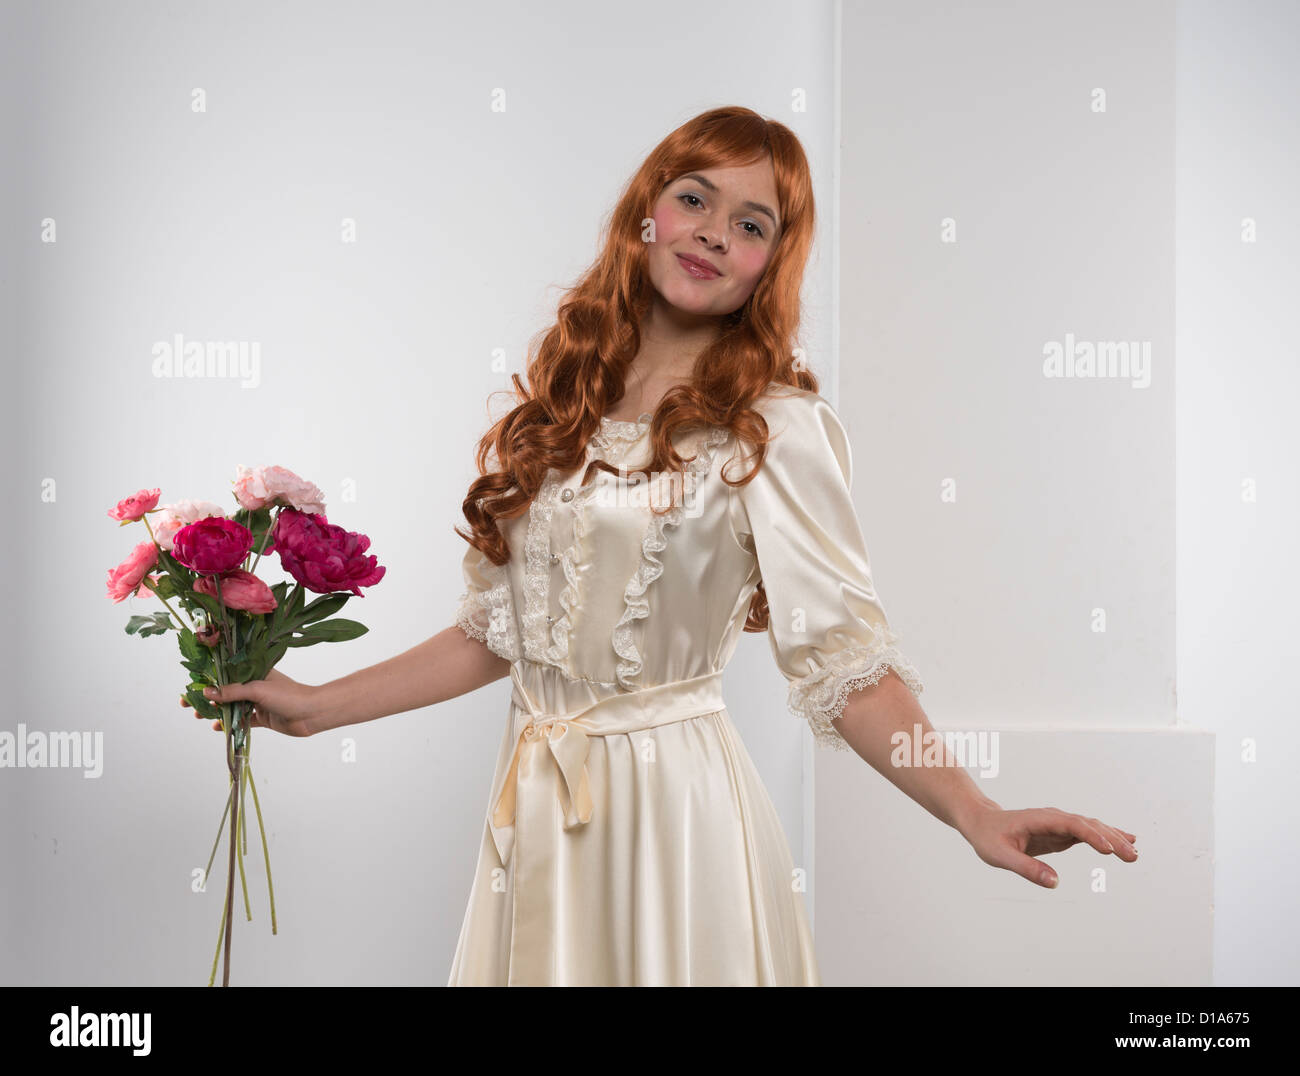 actor costume carnival theatre play person posing one young red woman flowers gown Stock Photo